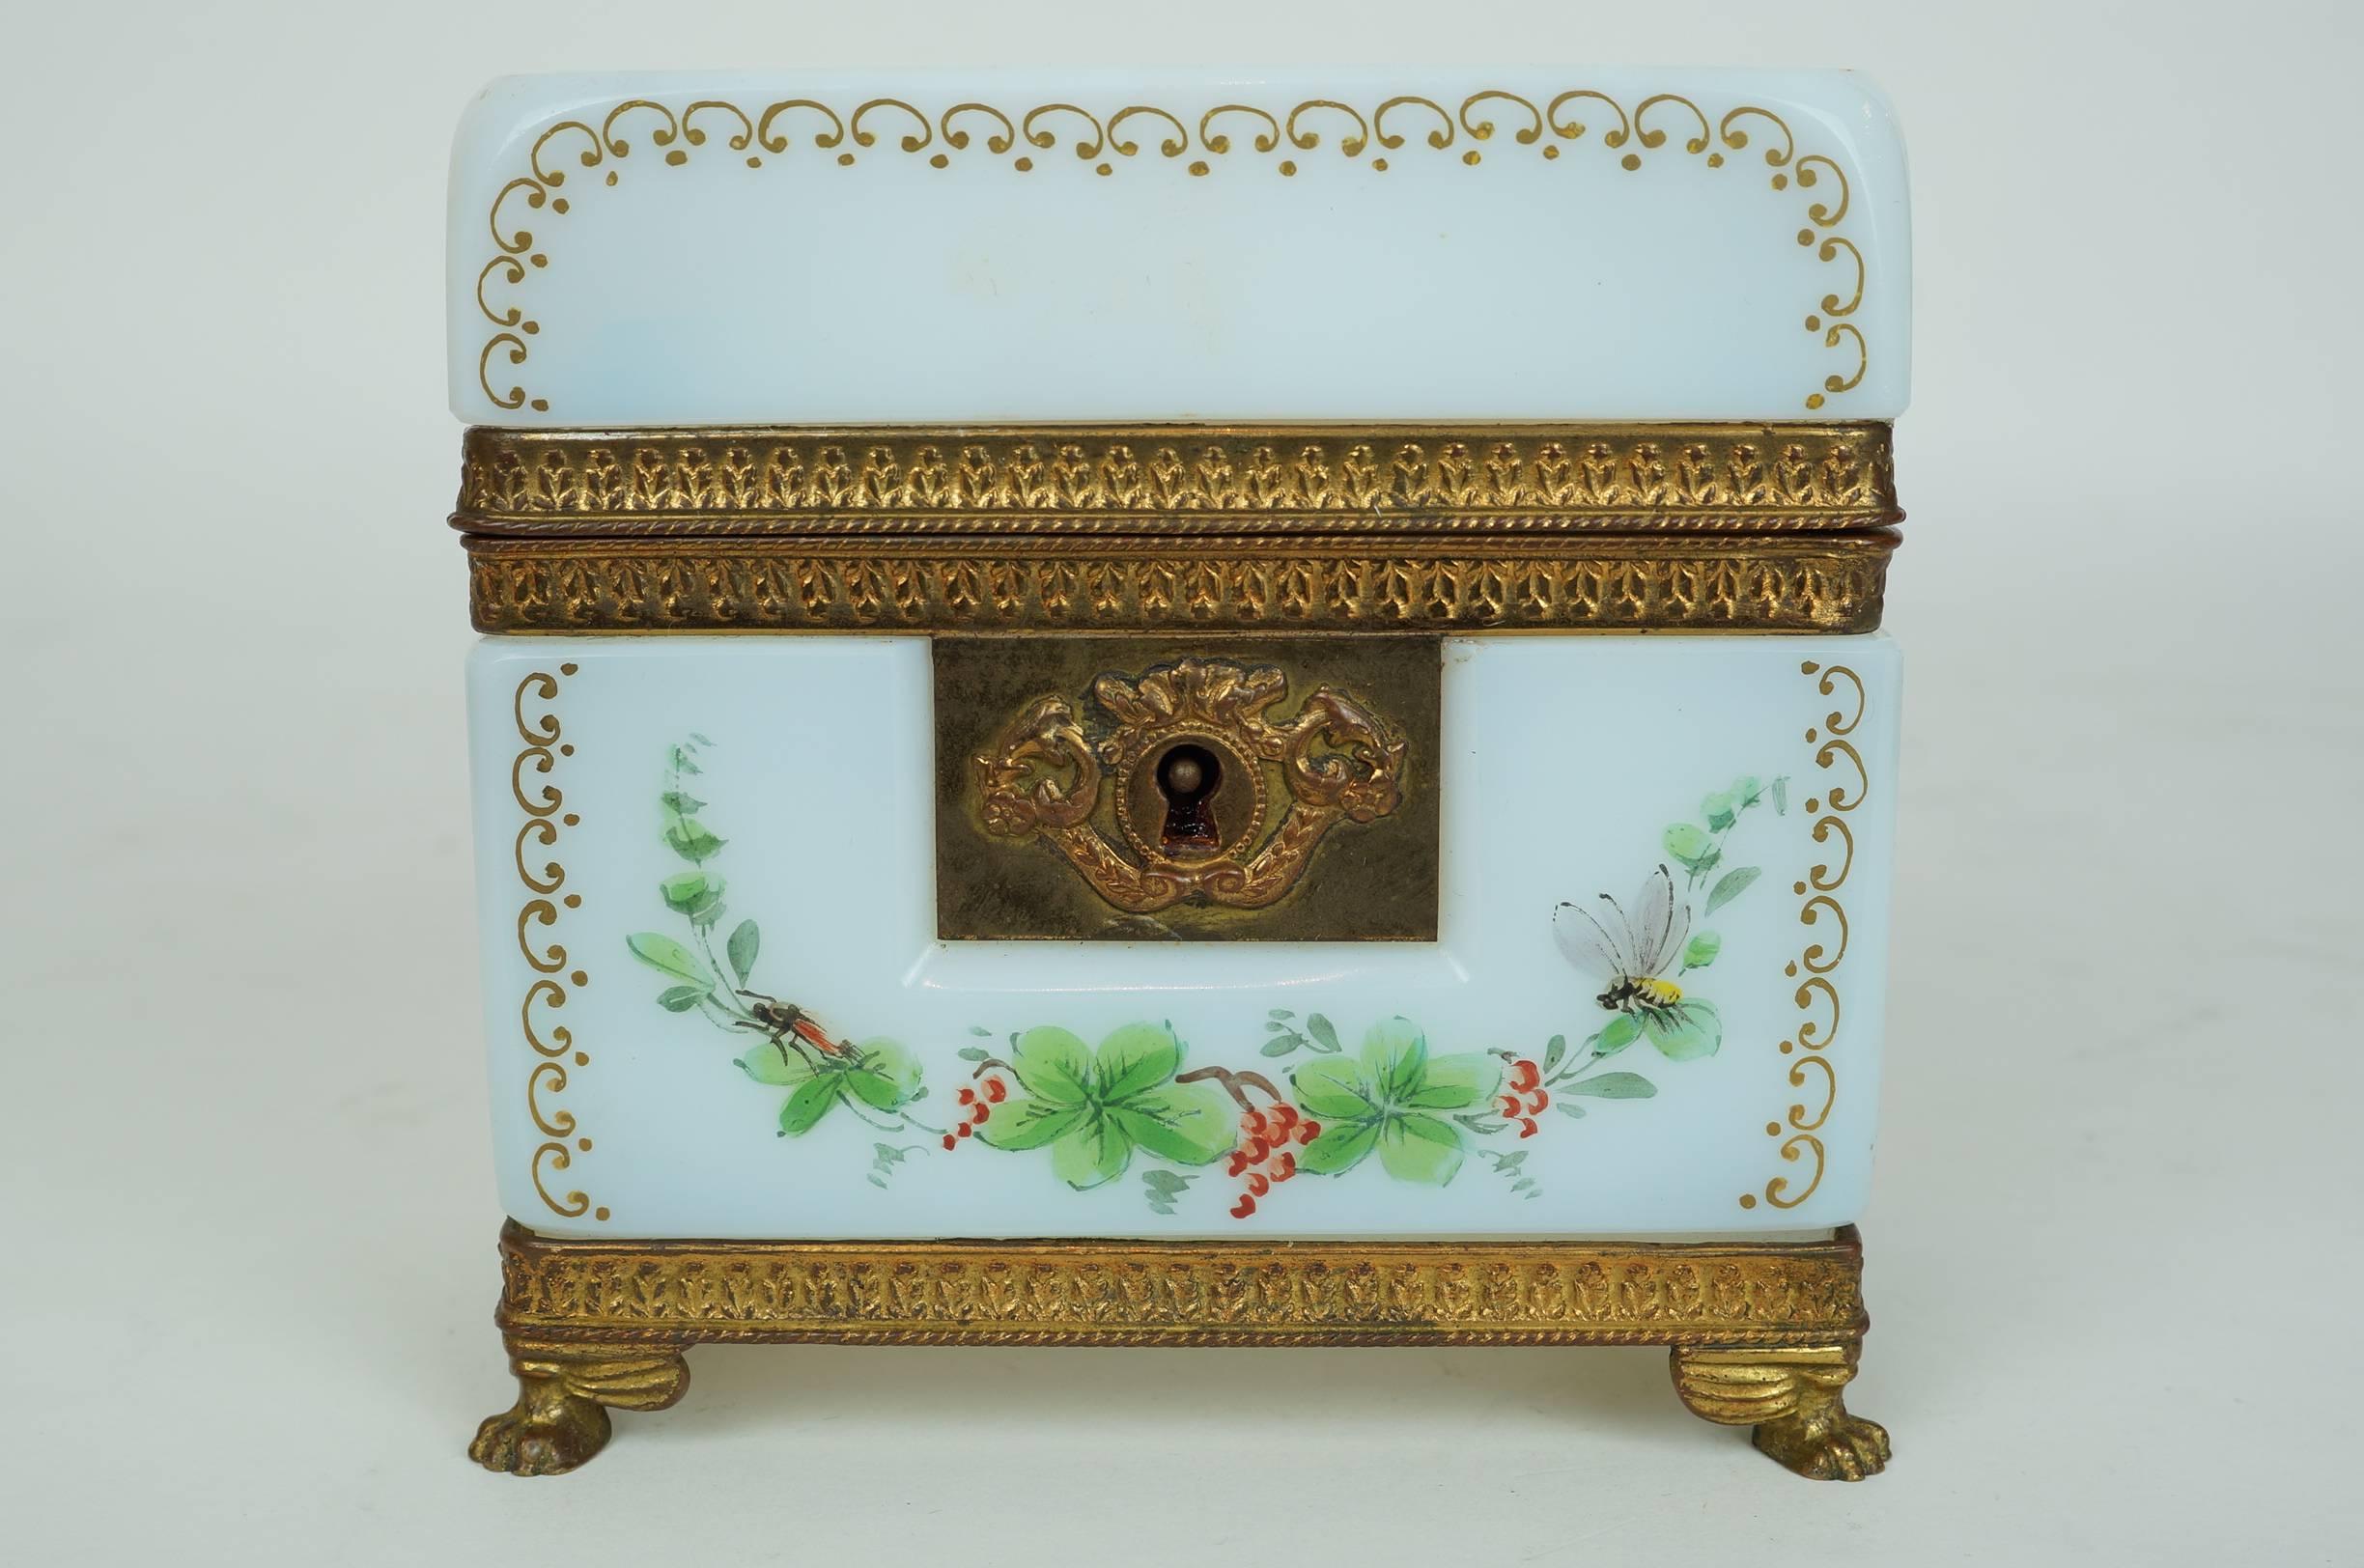 A French White Opaline Jewelry Box with Painted Floral and Bird Decorations
Stock Number: DA136